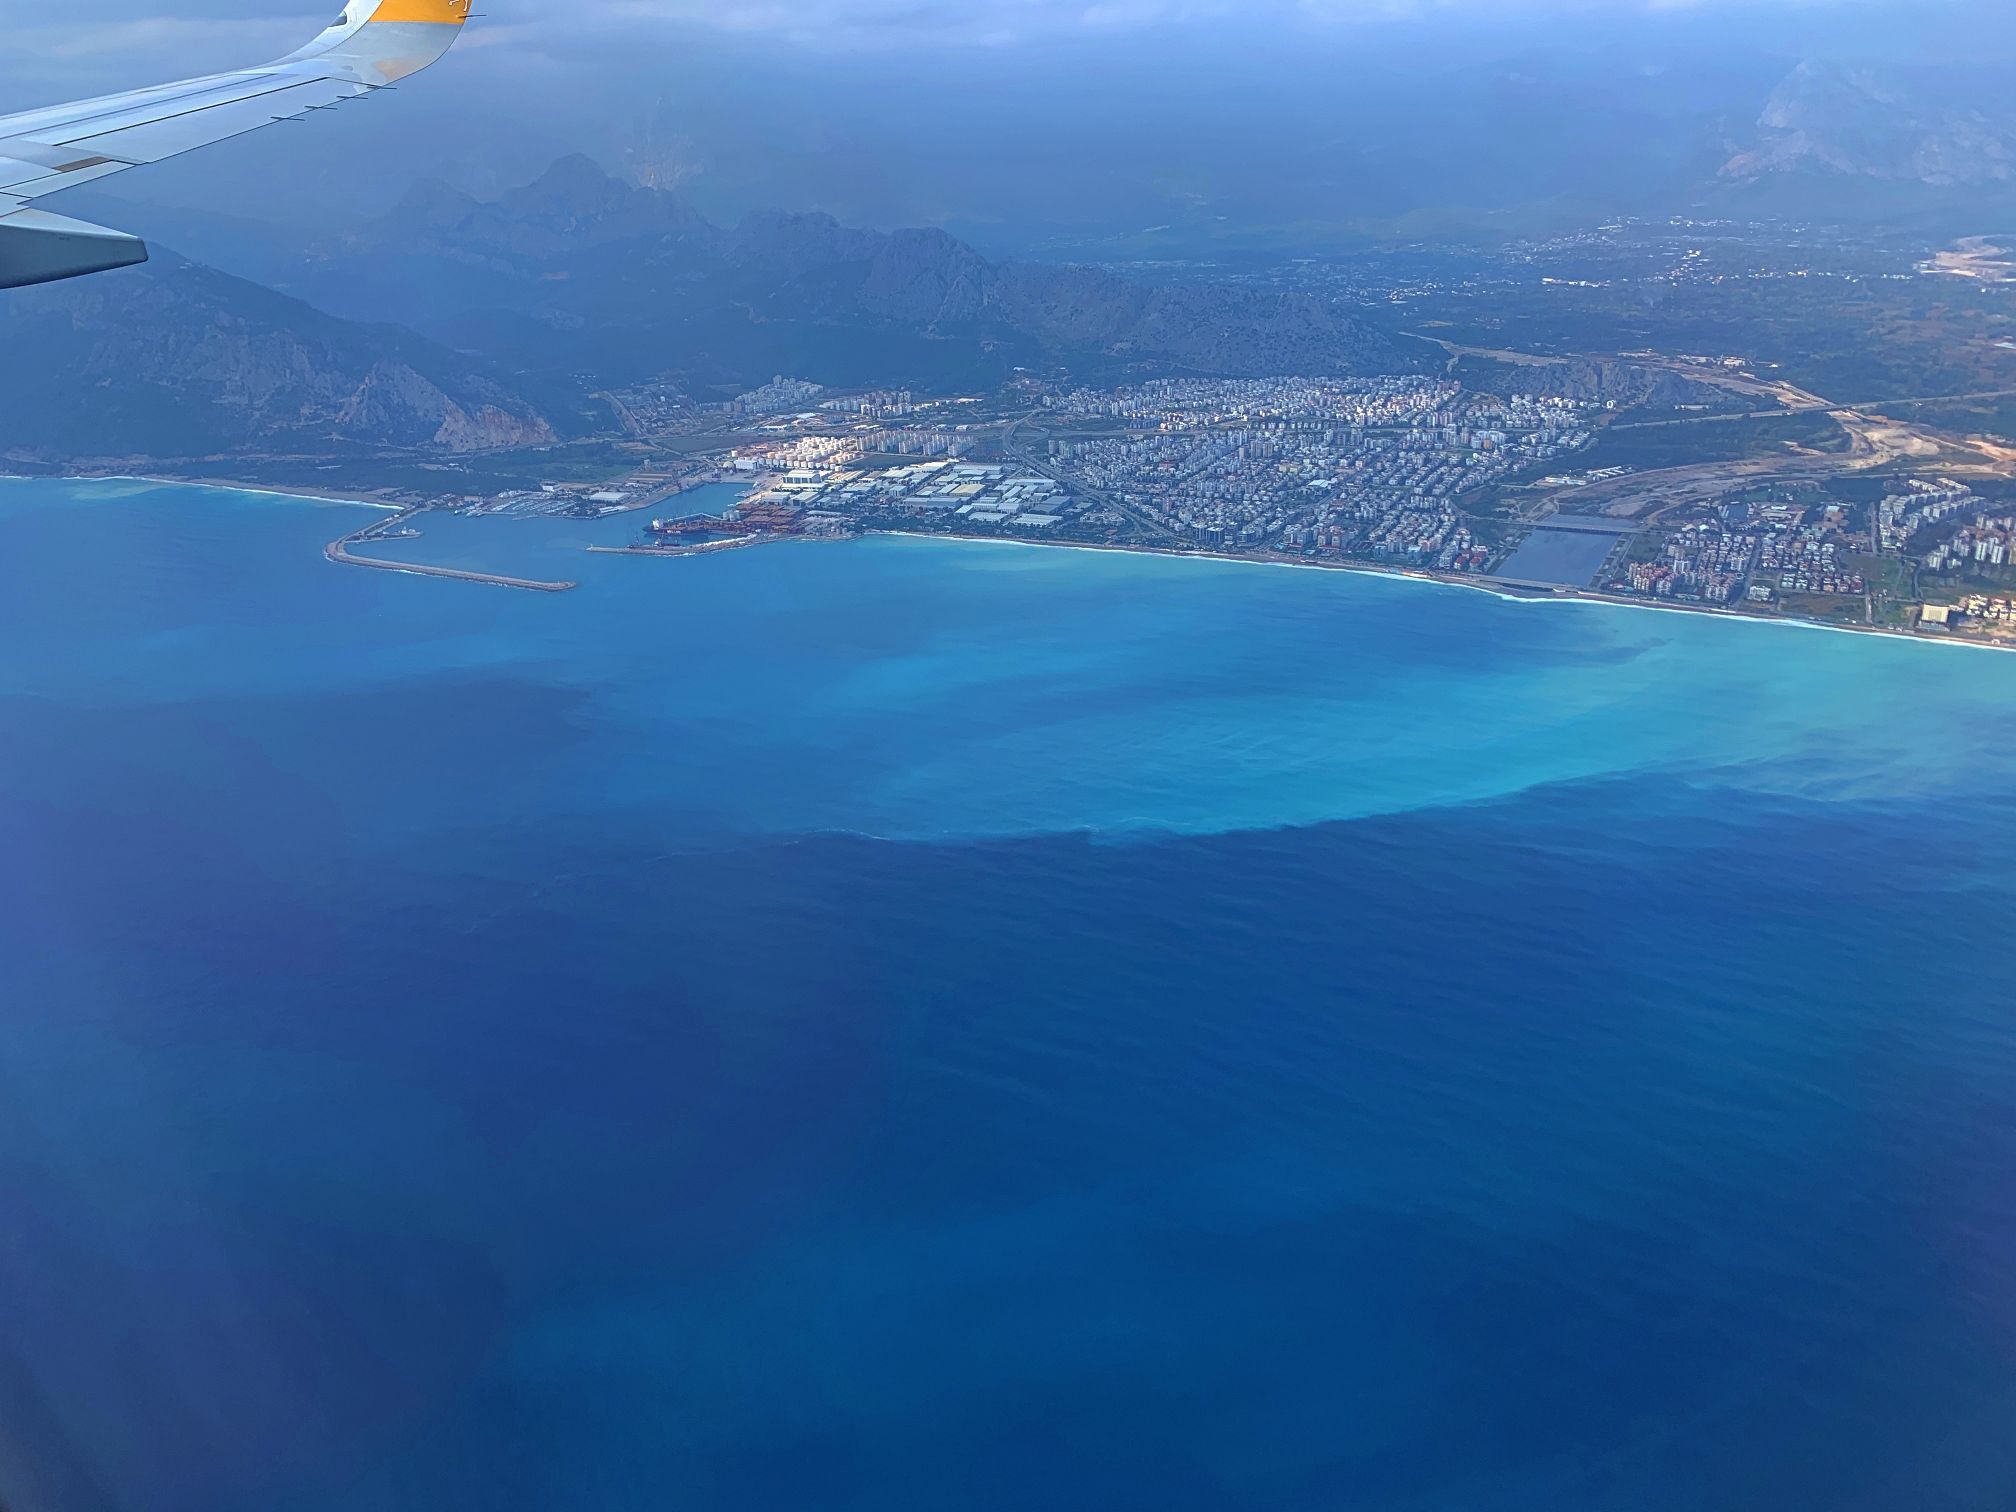 Another photo of Antalya's coastline as seen from the airplane